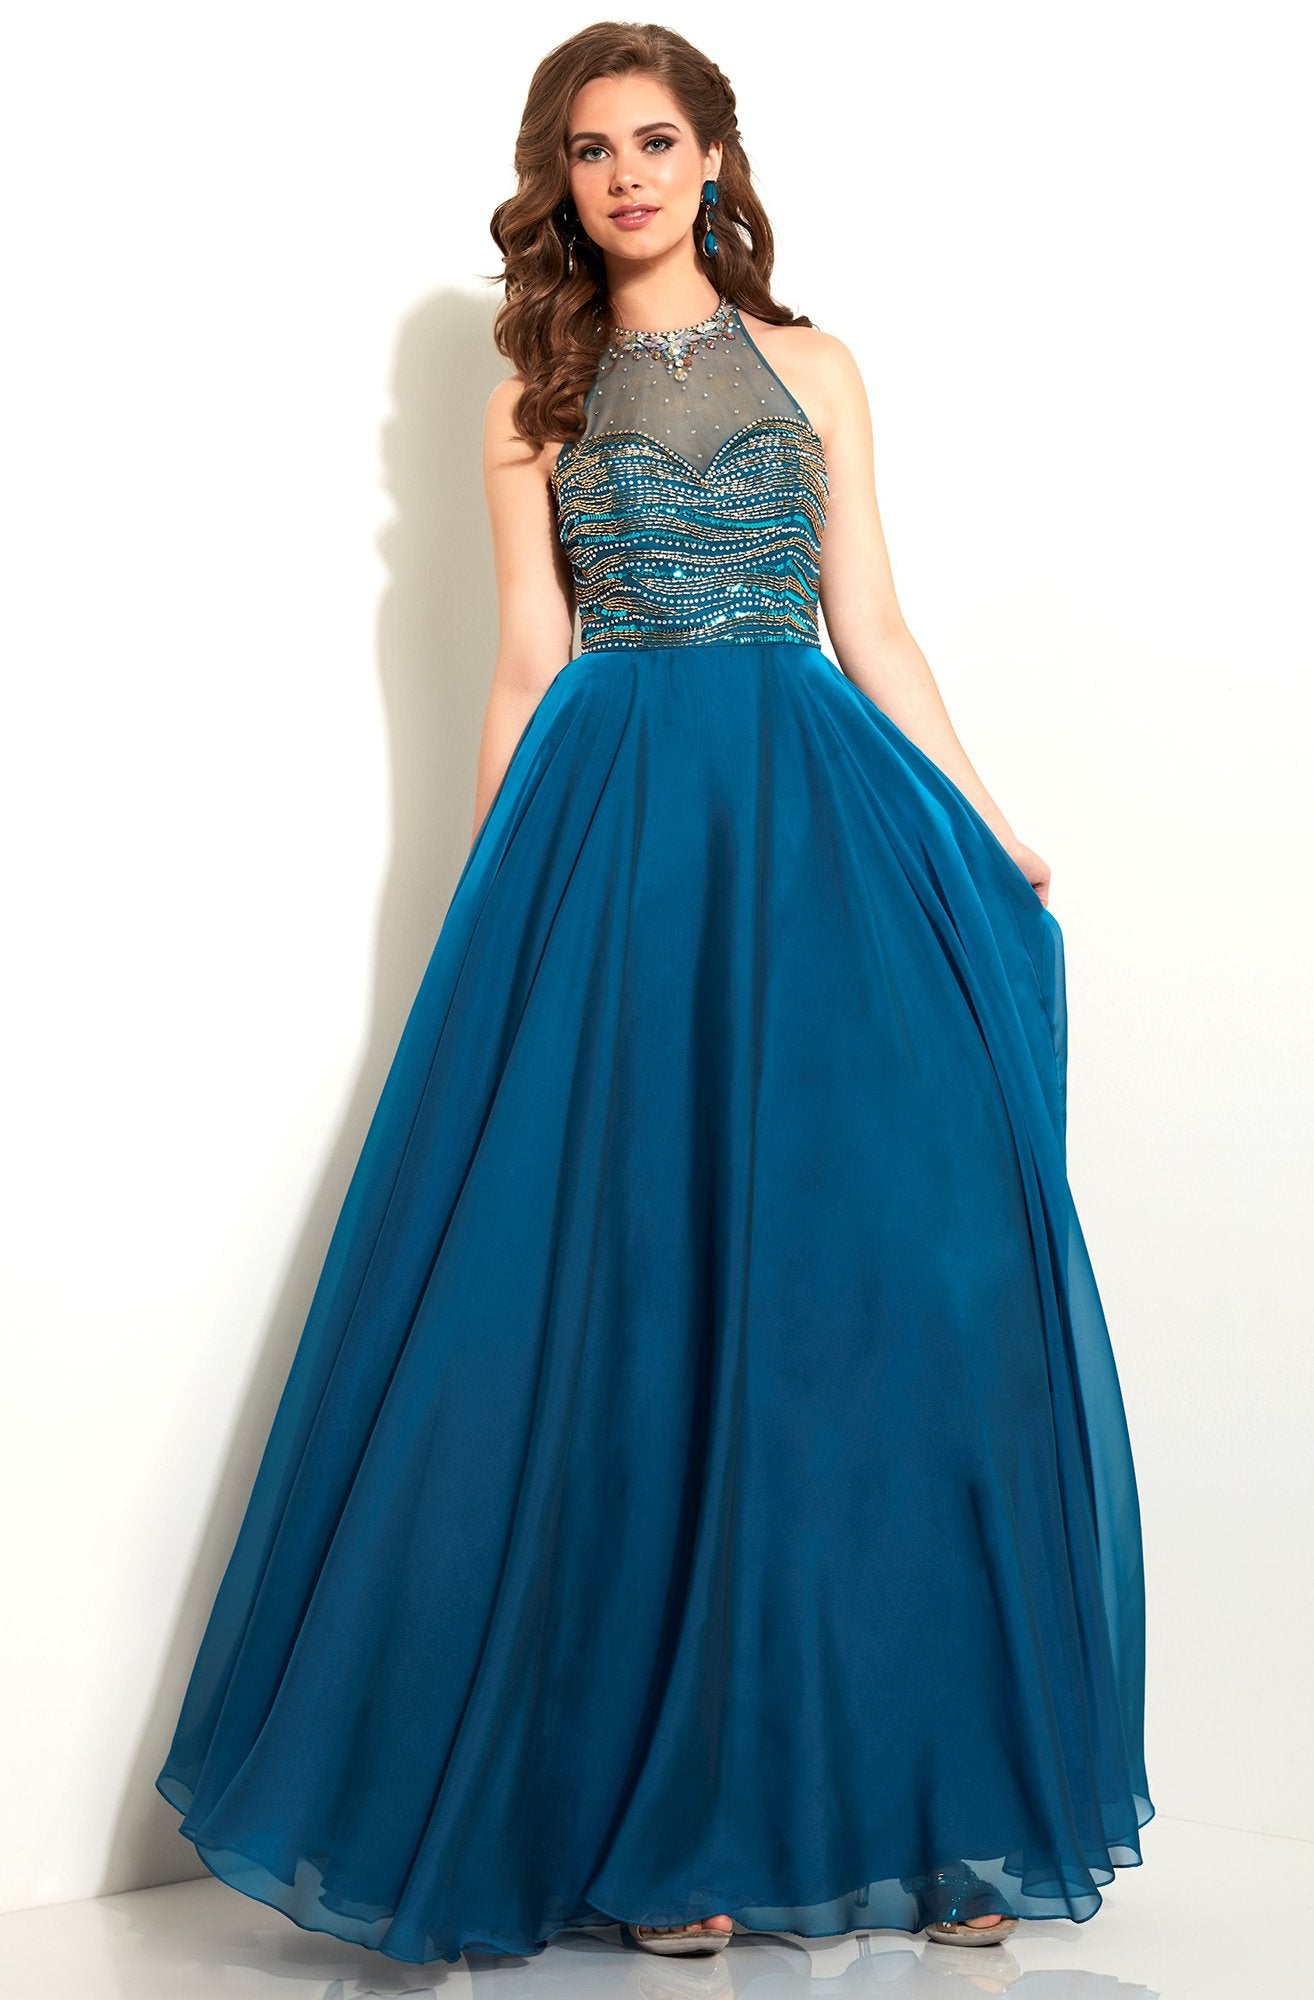 Studio 17 - Bejeweled High Halter Neck Two Tone Chiffon A-line Dress 12597 In Blue